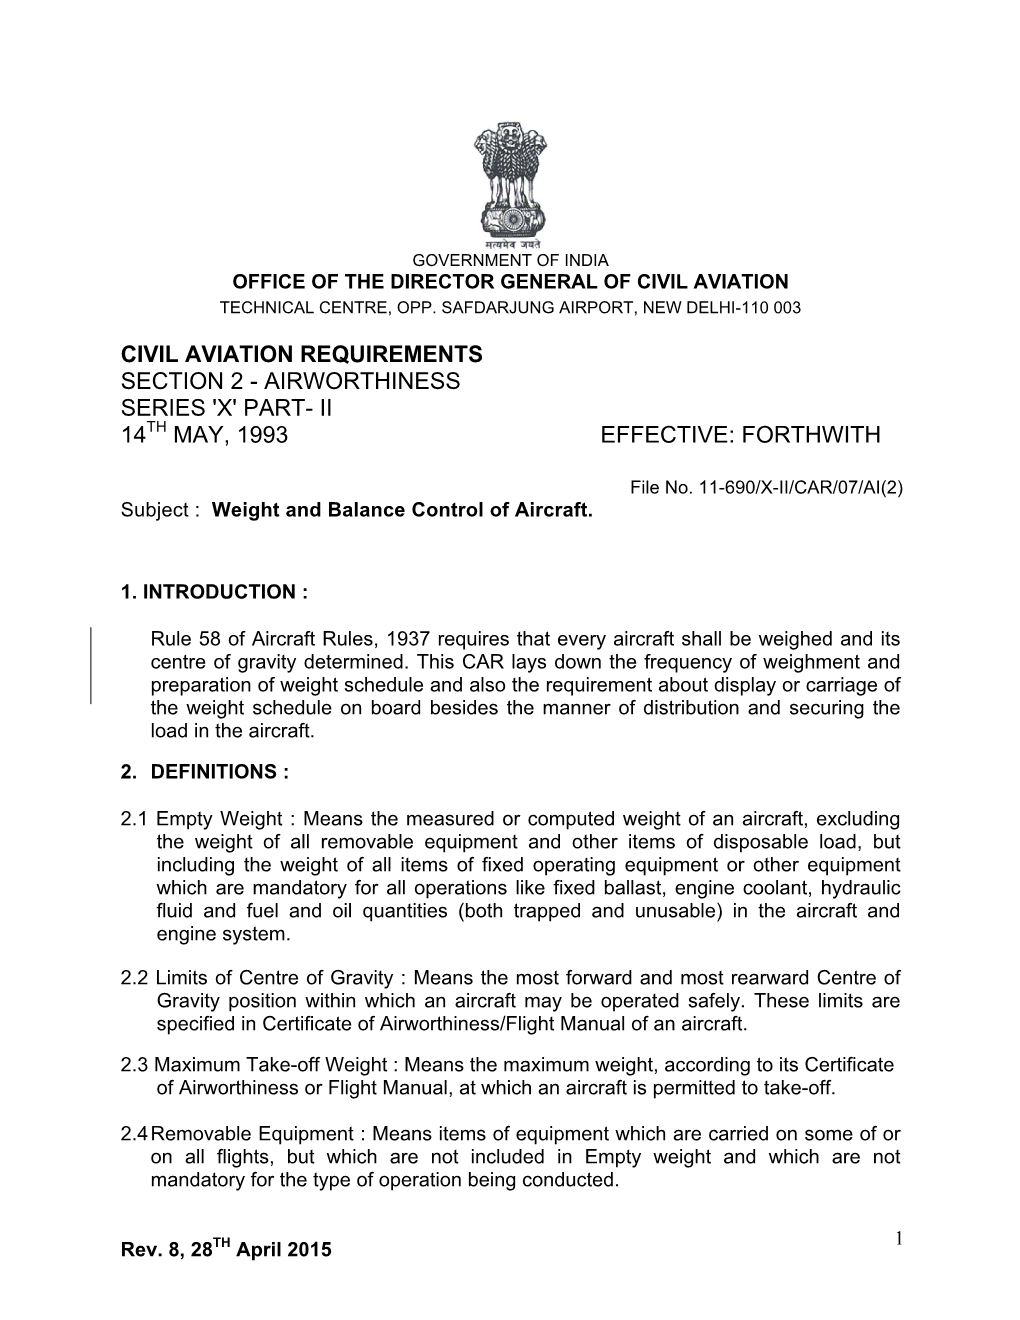 Civil Aviation Requirements Section 2 - Airworthiness Series 'X' Part- Ii 14Th May, 1993 Effective: Forthwith